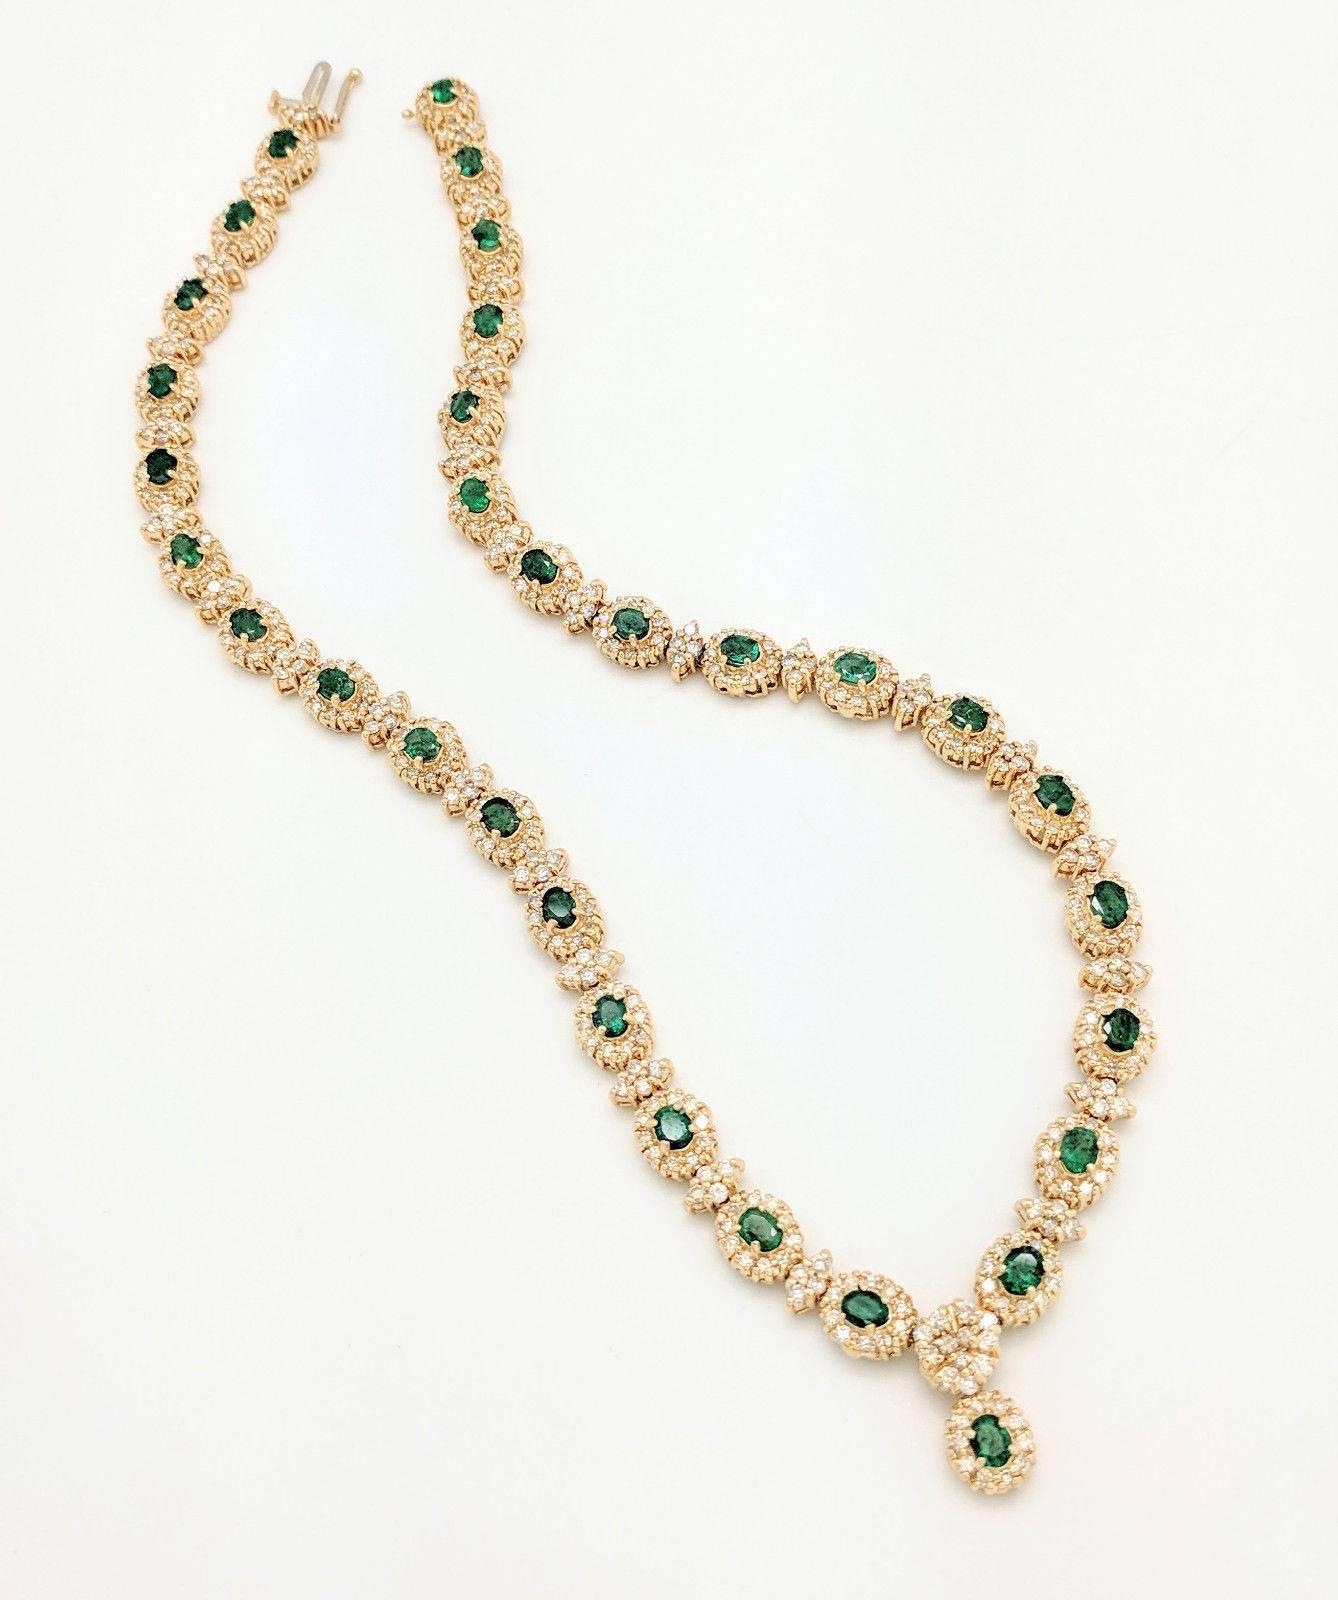 14 Karat Gold 16.72 Carat Emerald and Diamond Tennis Necklace 54.8 Grams In Excellent Condition For Sale In Gainesville, FL